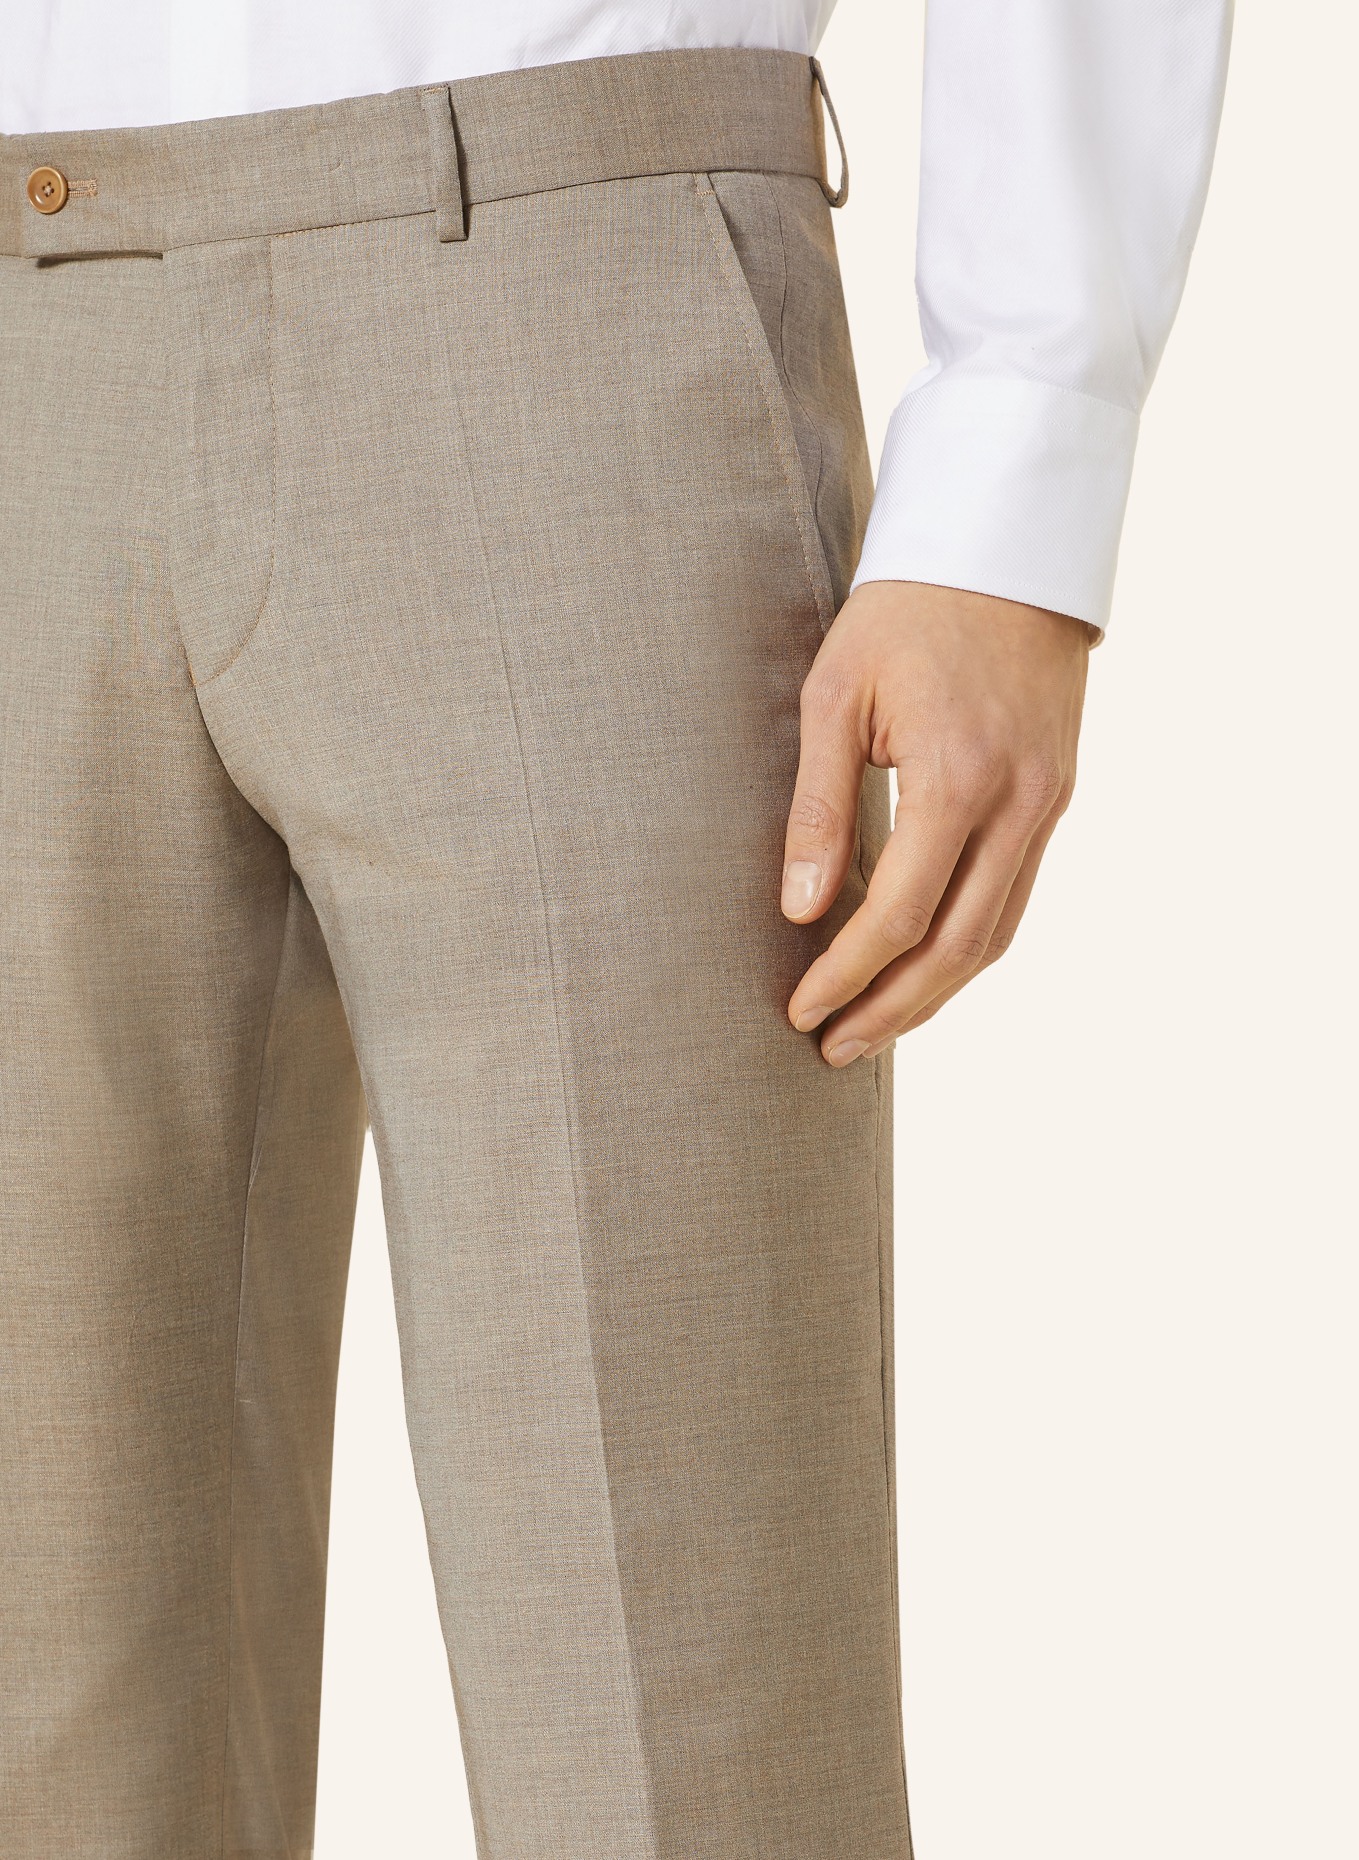 CG - CLUB of GENTS Suit trousers CG PACO slim fit, Color: 71 BRAUN HELL (Image 6)